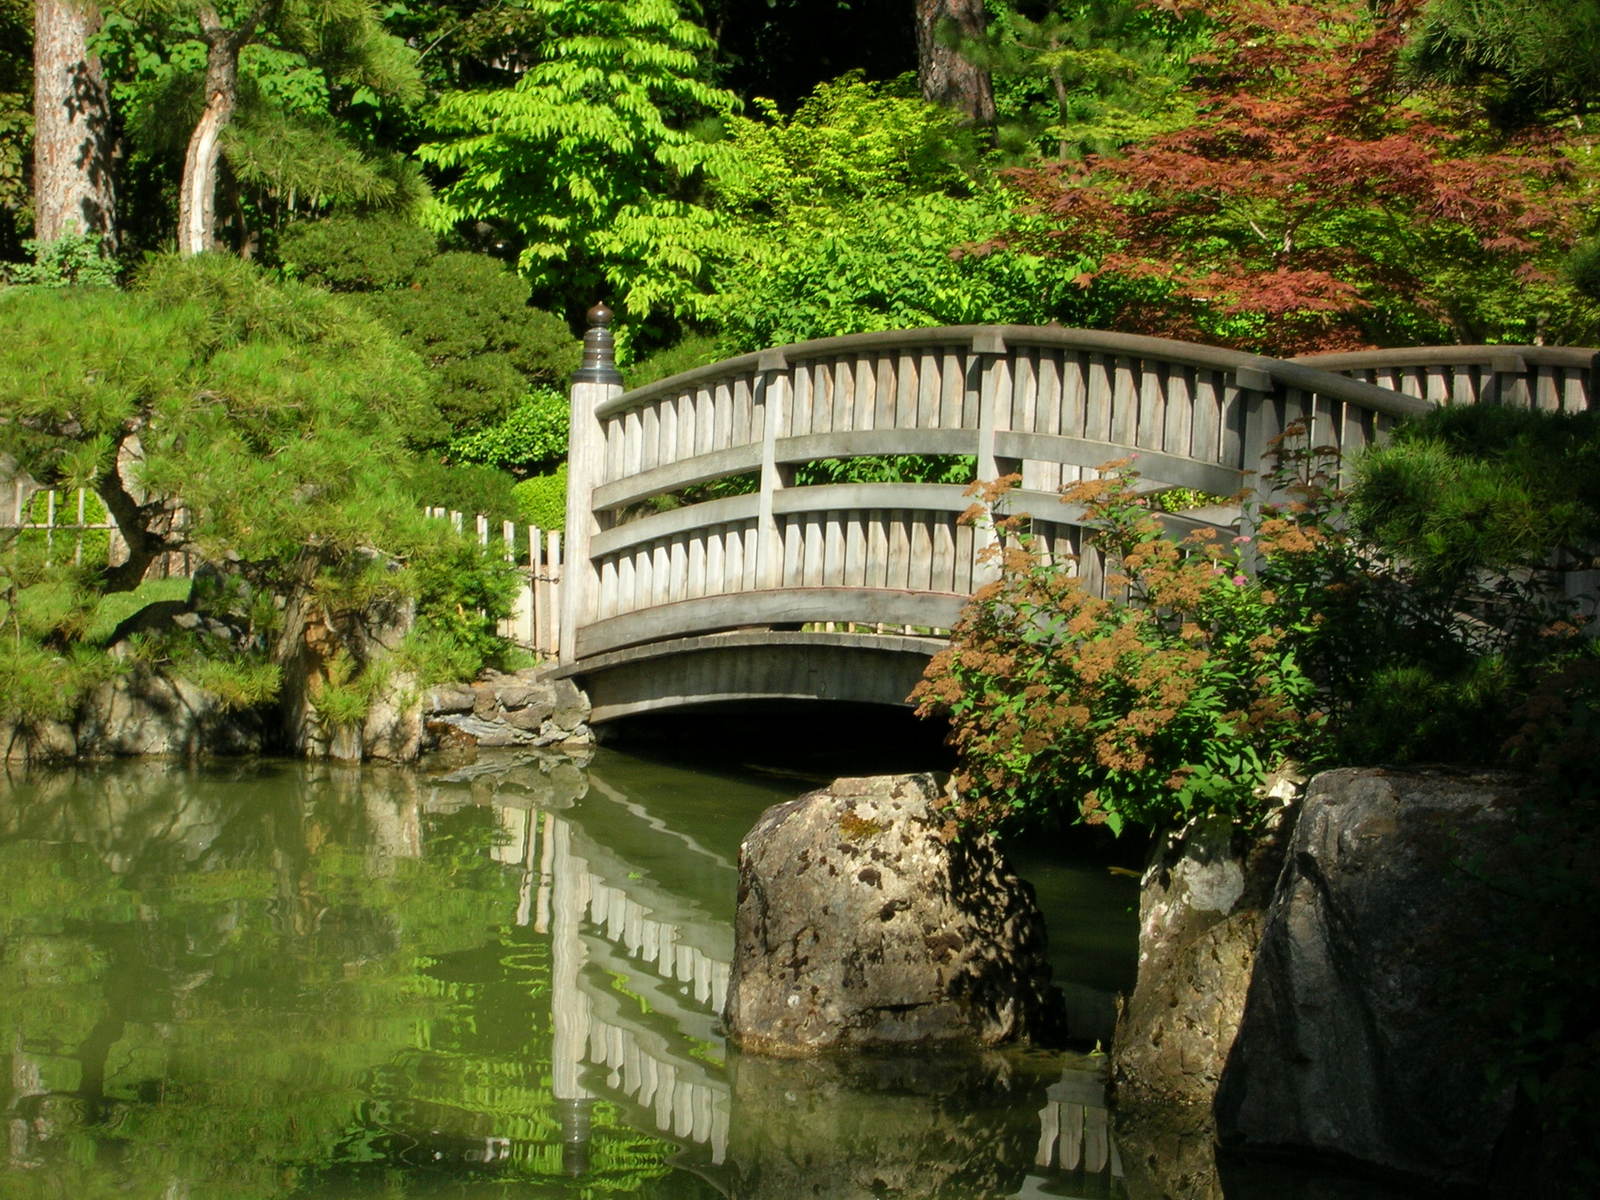 a bridge over water with rocks in the foreground and green trees